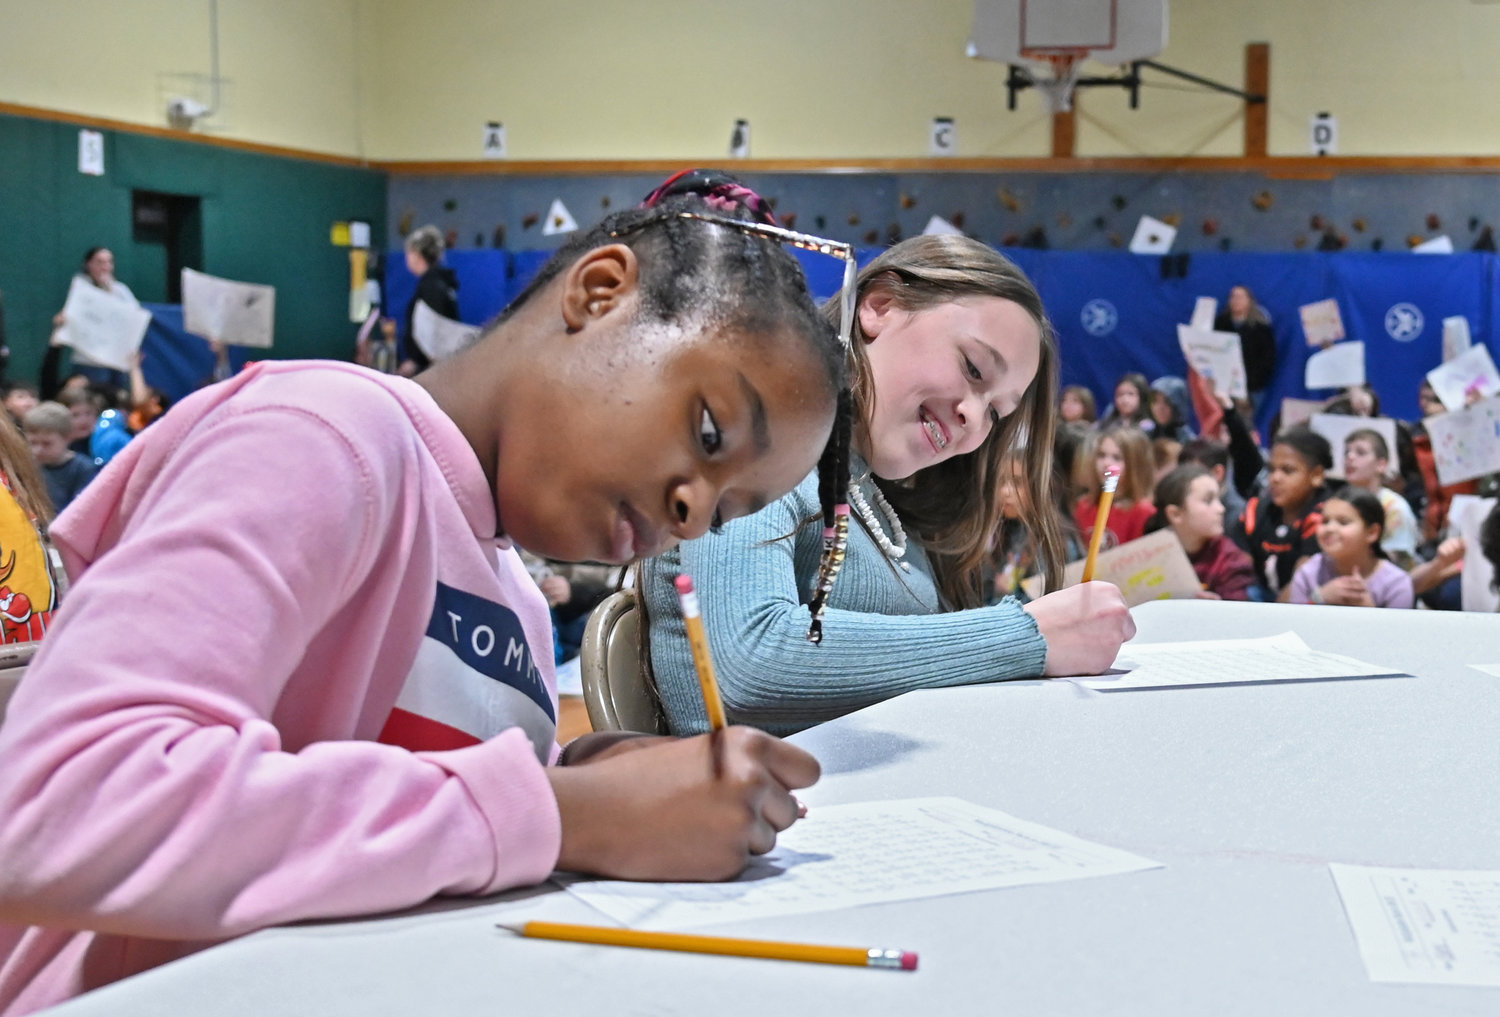 Kate Chapoteau and Rylee Anderson work on their math problems in the five-minute deadline to complete them Friday, Feb. 10 during the Math Fact Super Bowl STEM finals at Gansevoort Elementary School in Rome.